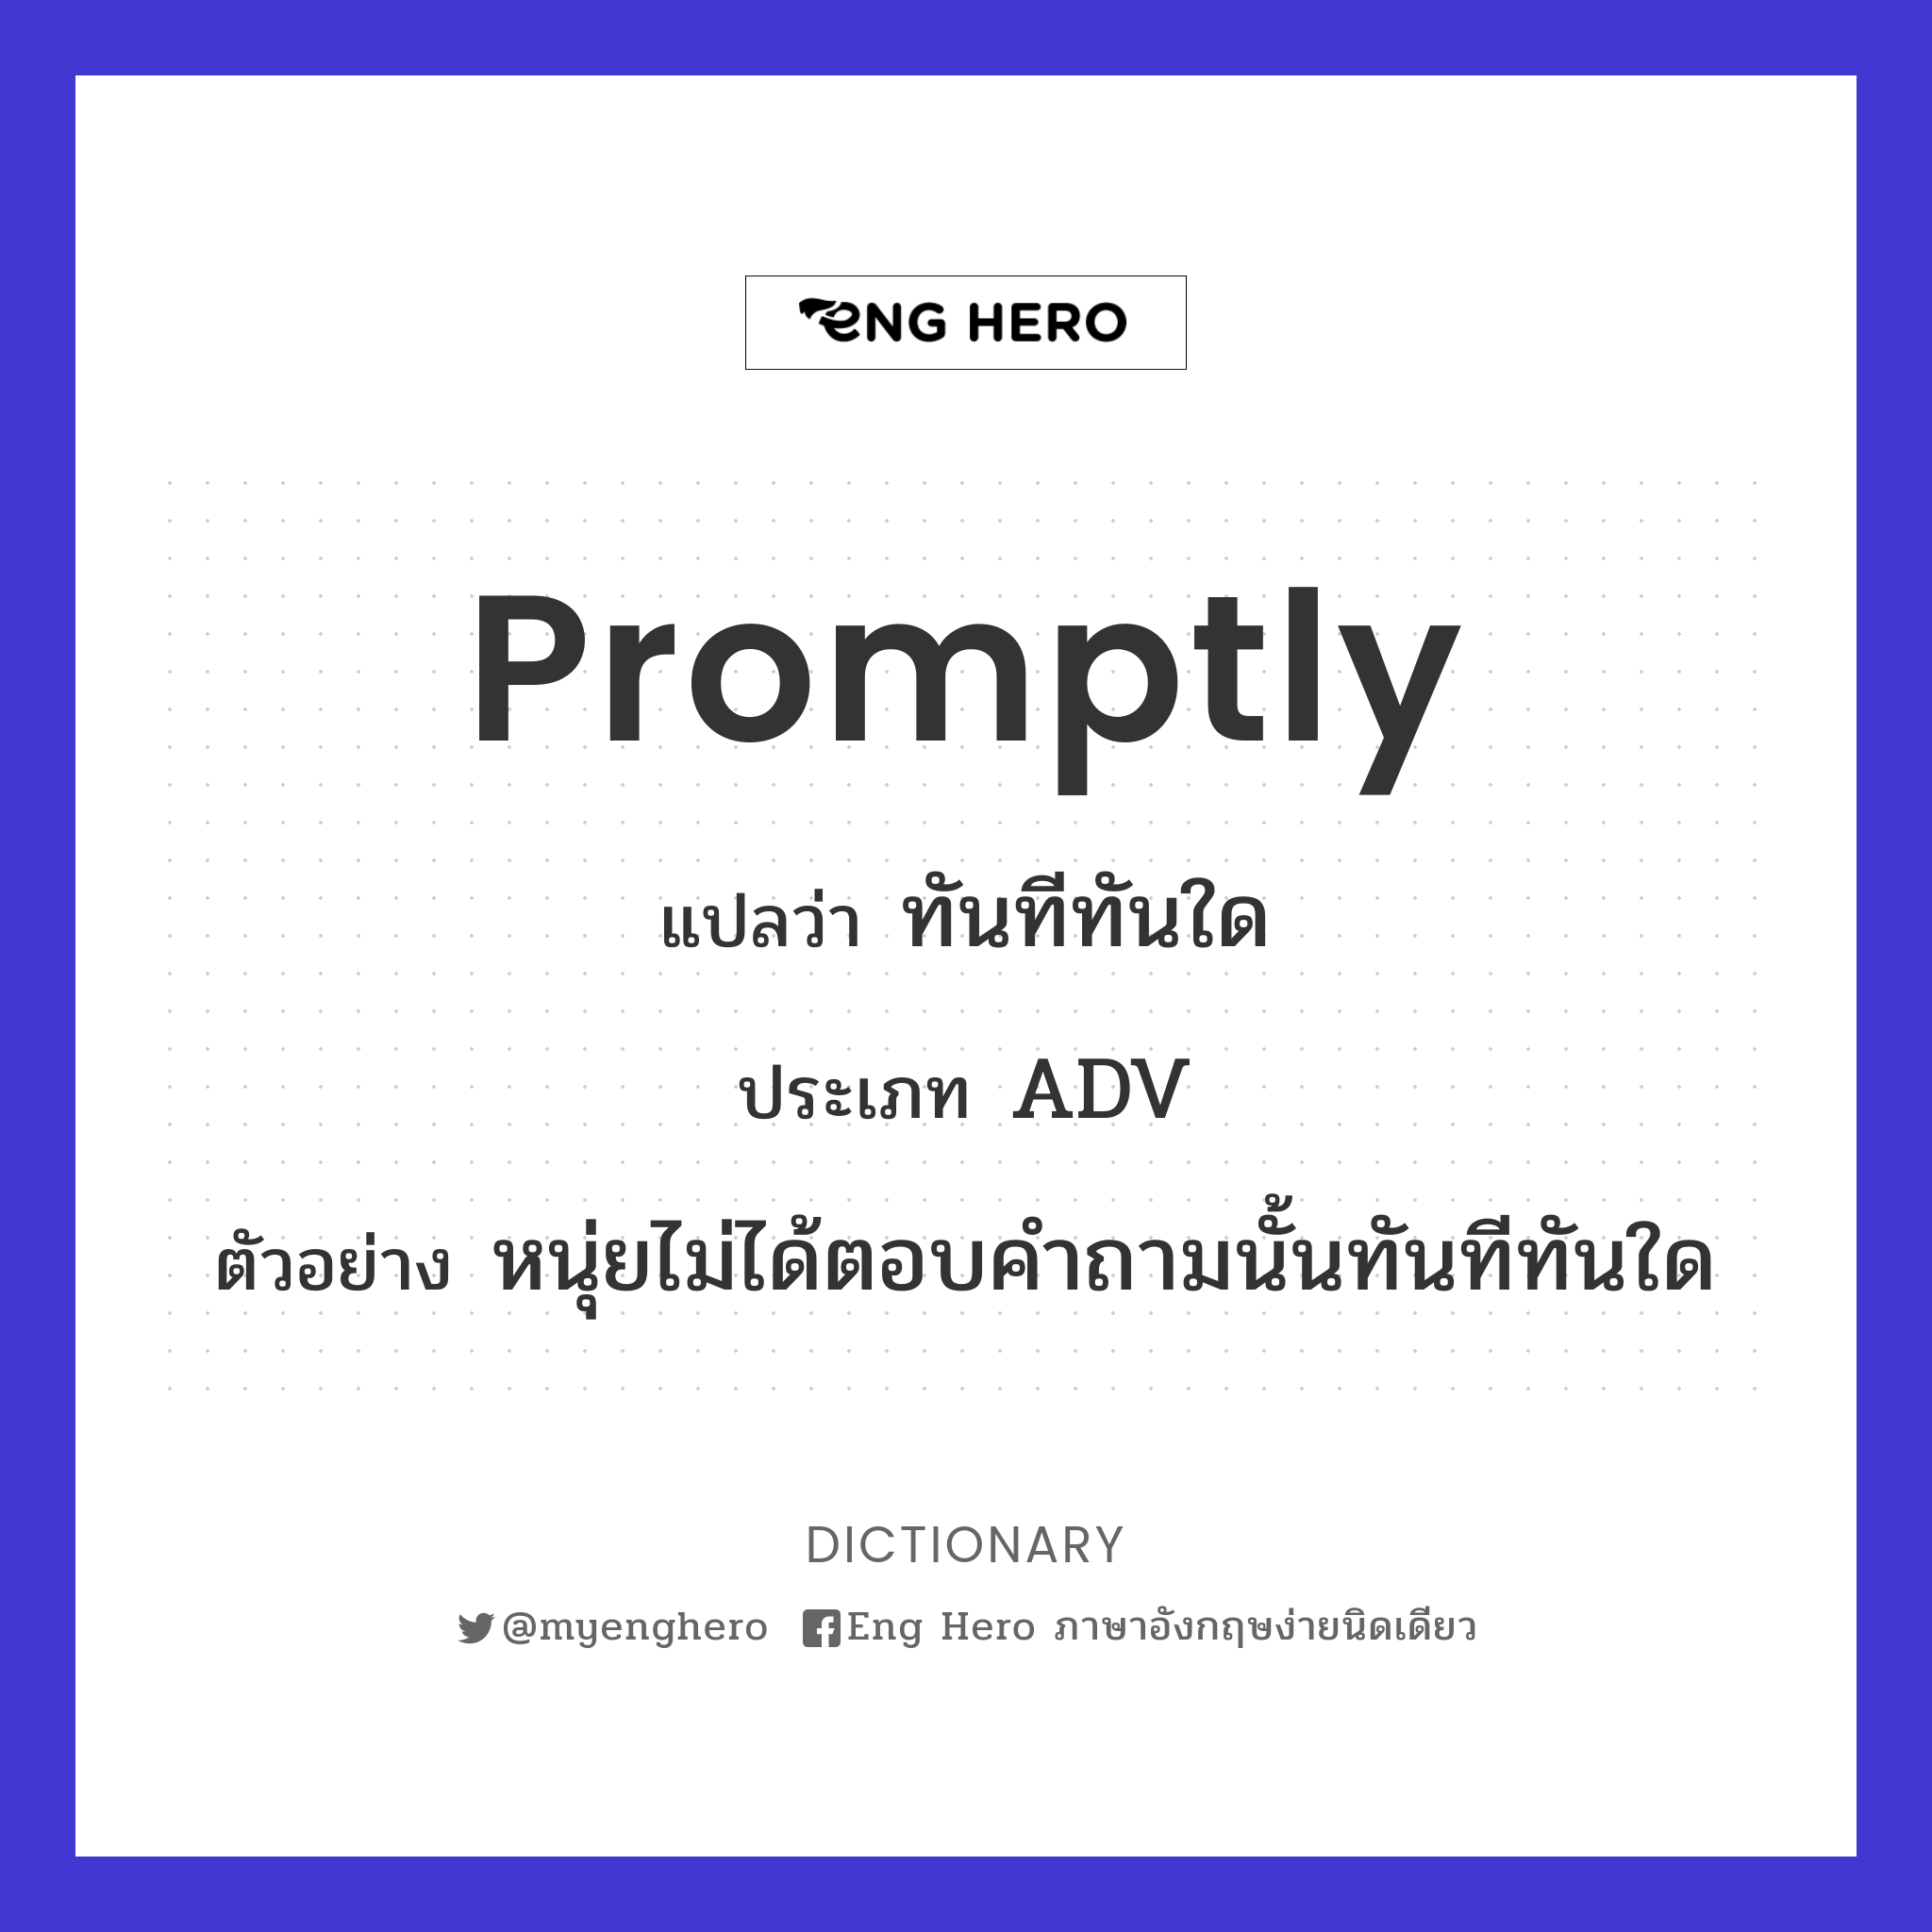 promptly